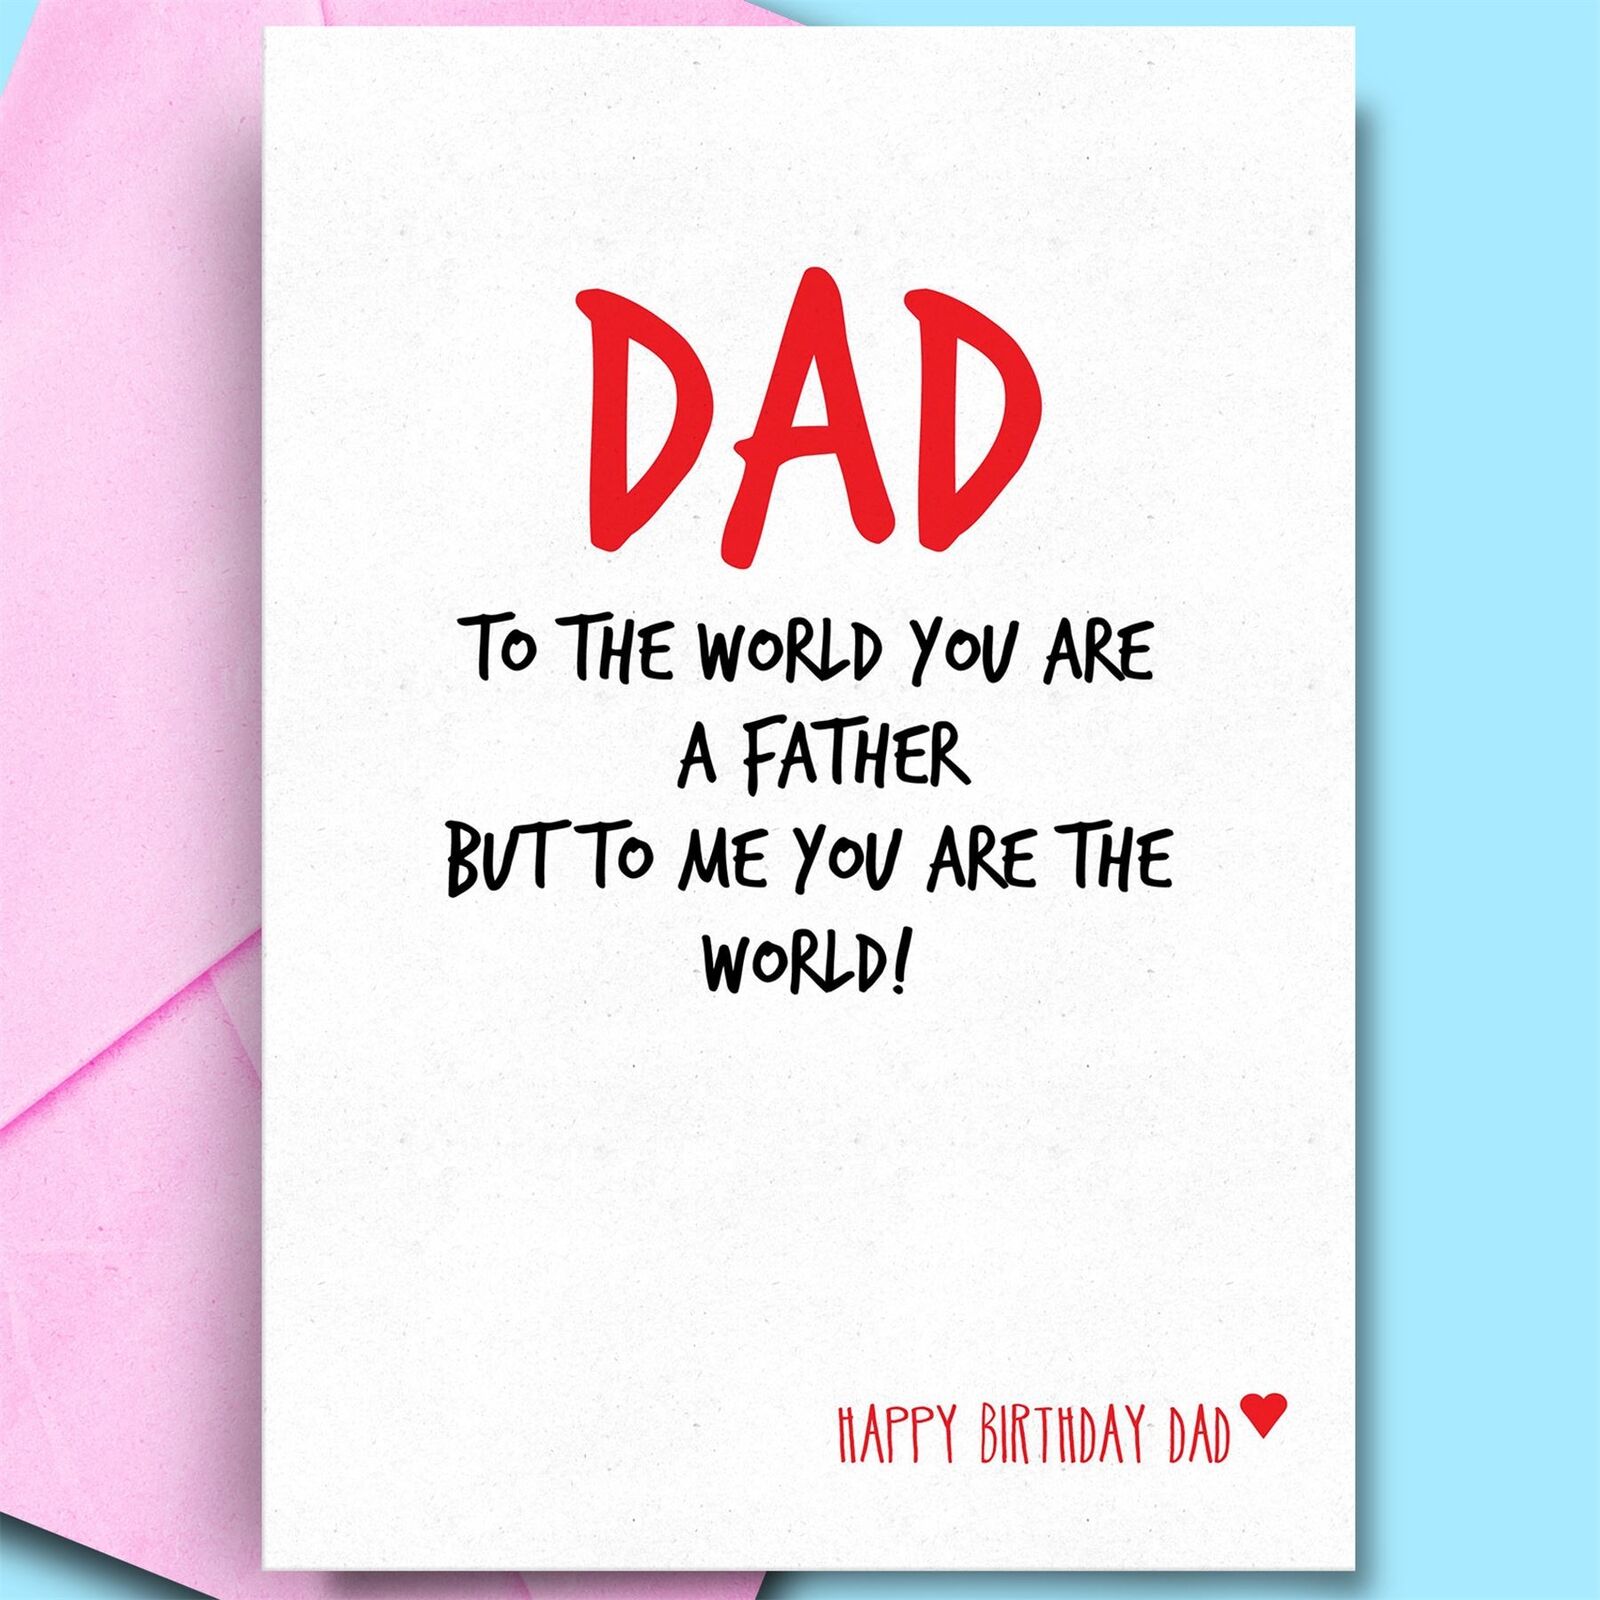 Happy Birthday Dad Cards From Son Daughter Rude Funny Adult Birthday Cards  7437744244217 | eBay